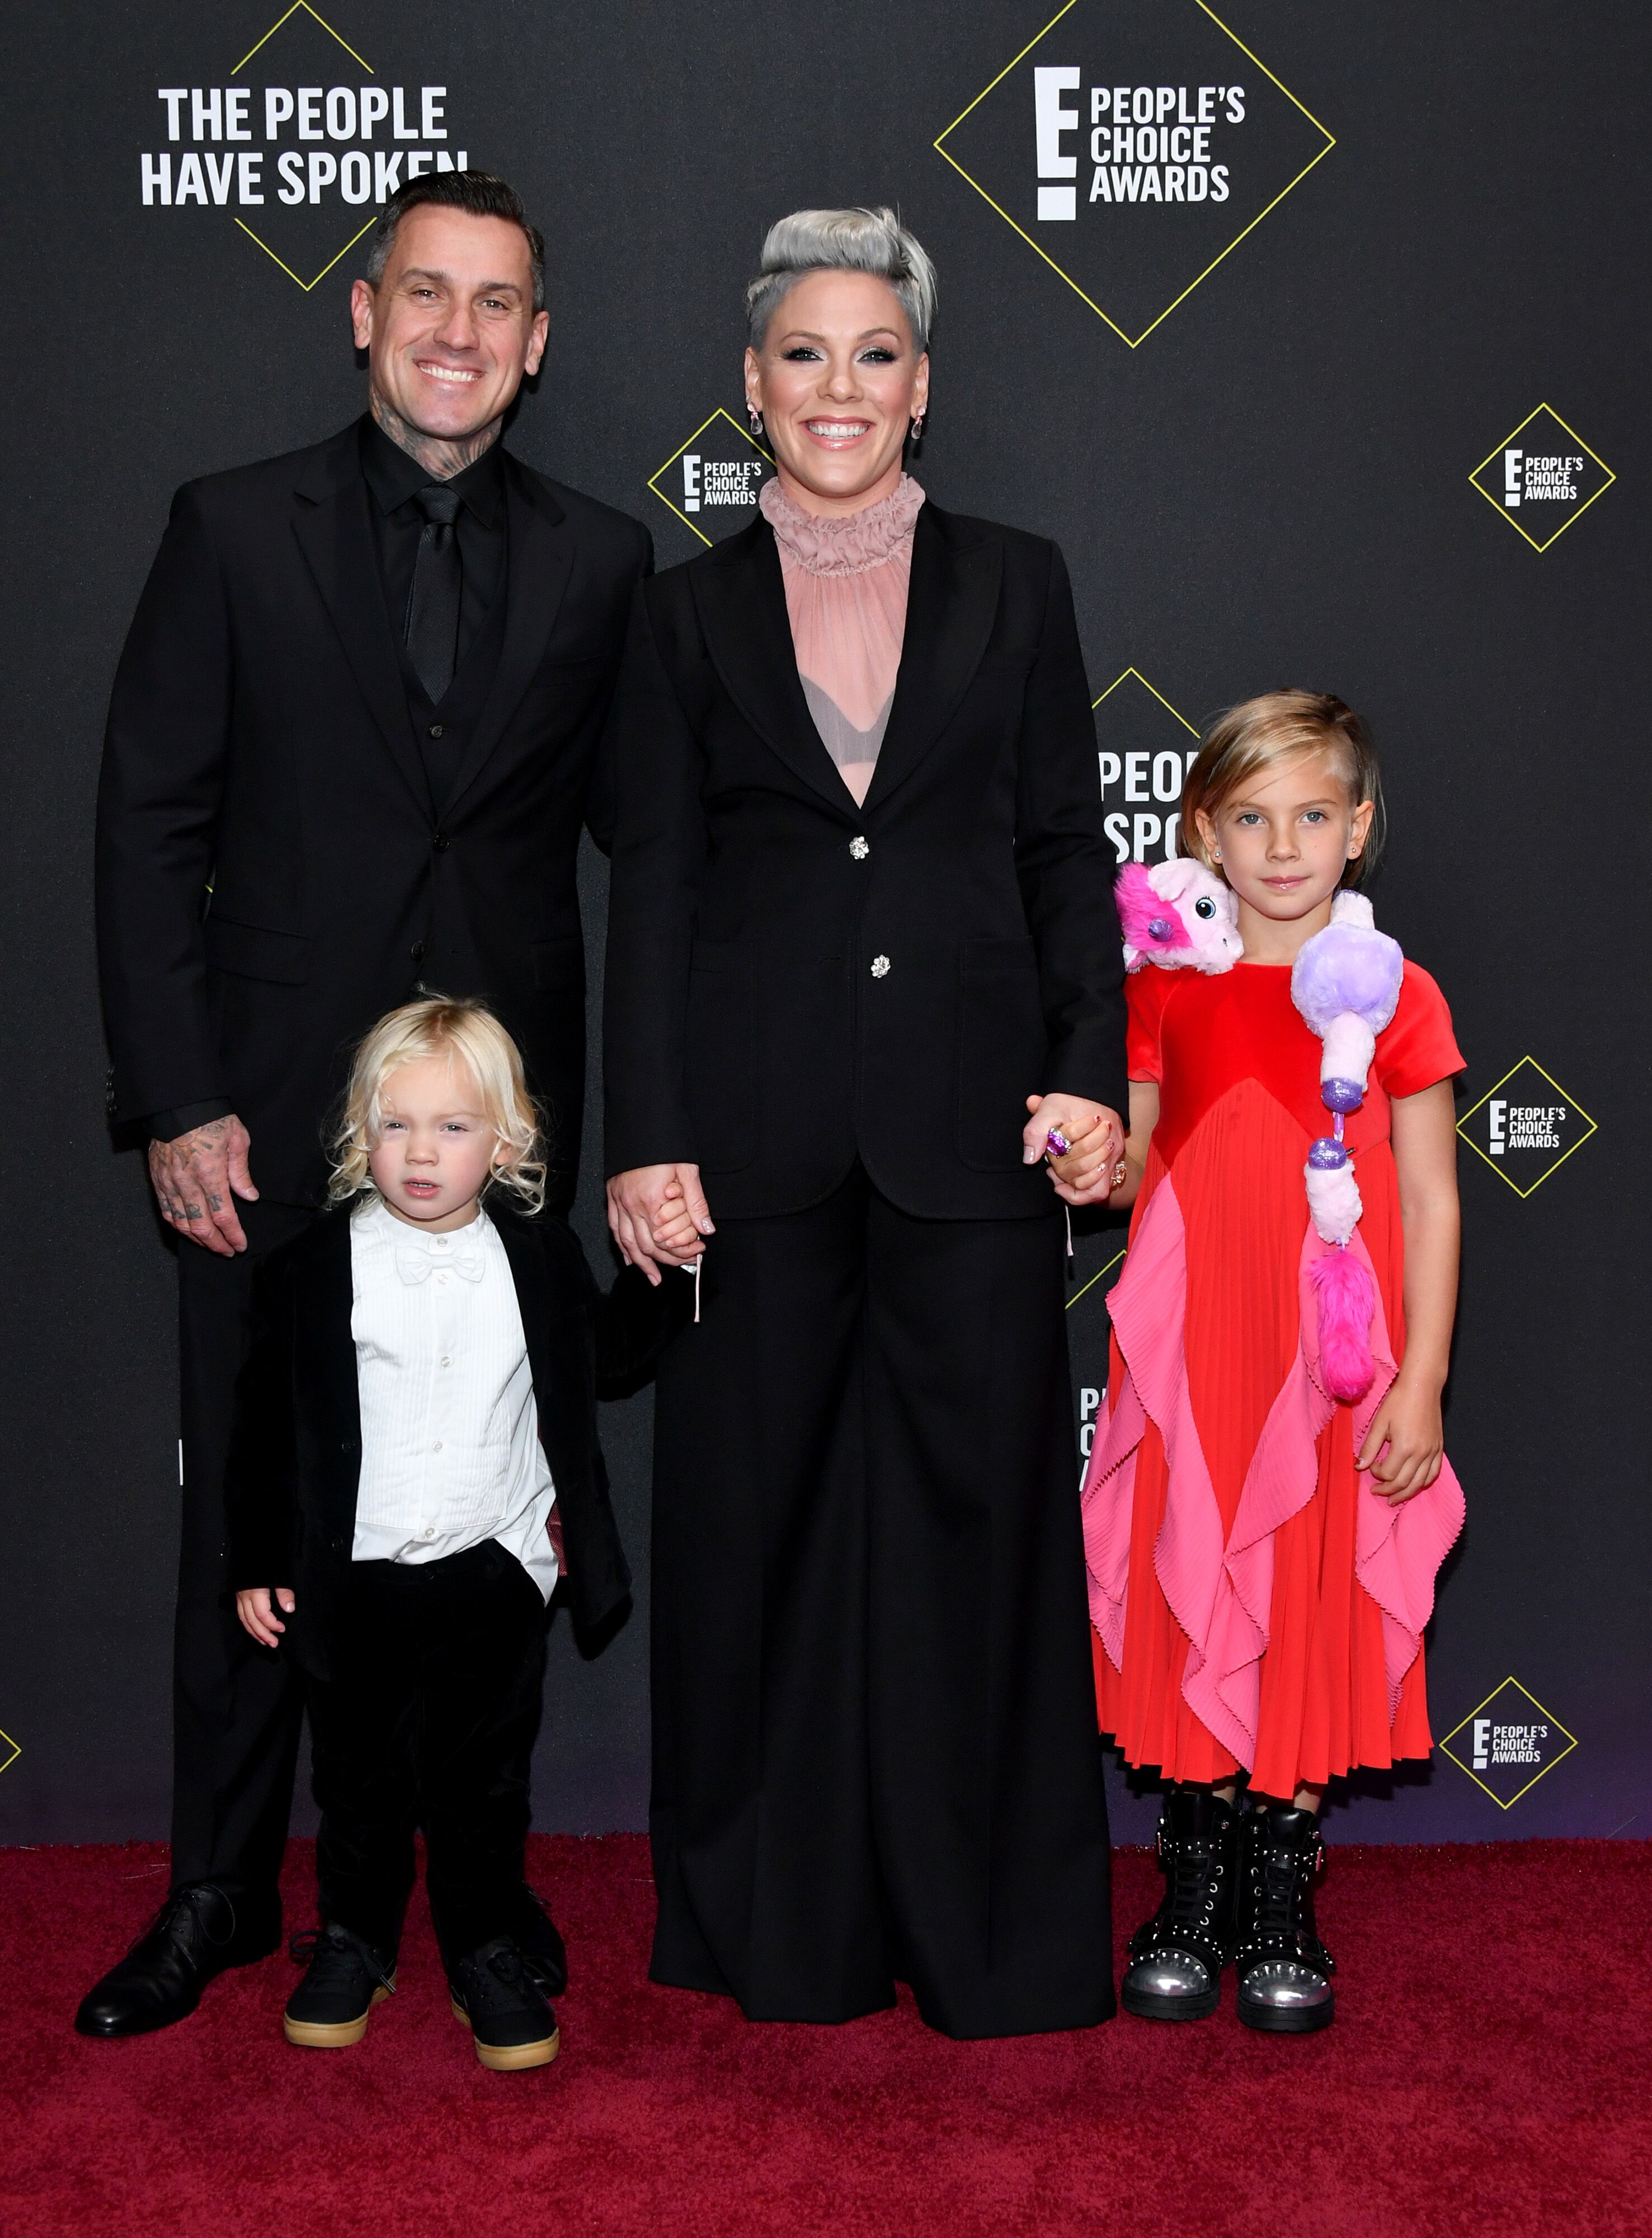 Pink brings family with her on red carpet of E! People's Choice Awards